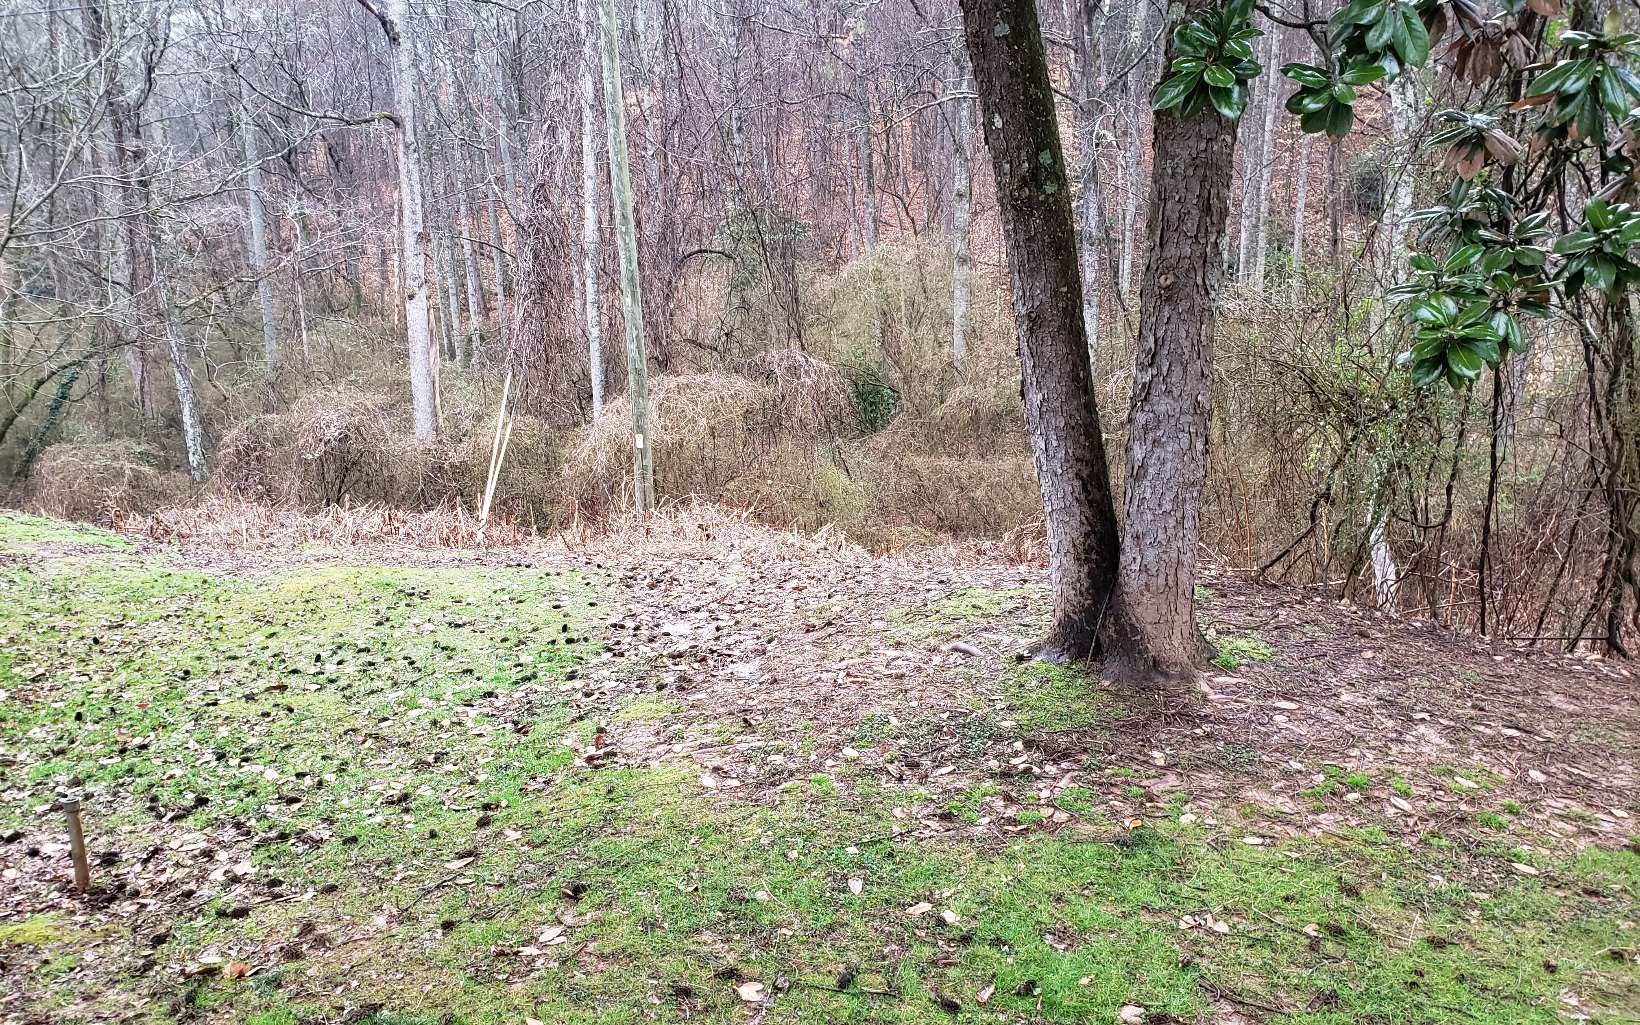 Vacant lot 1 mile from Downtown Ellijay with access to City Water and Natural Gas. Call Listing agent for more information. Property is not inside the City Limits.